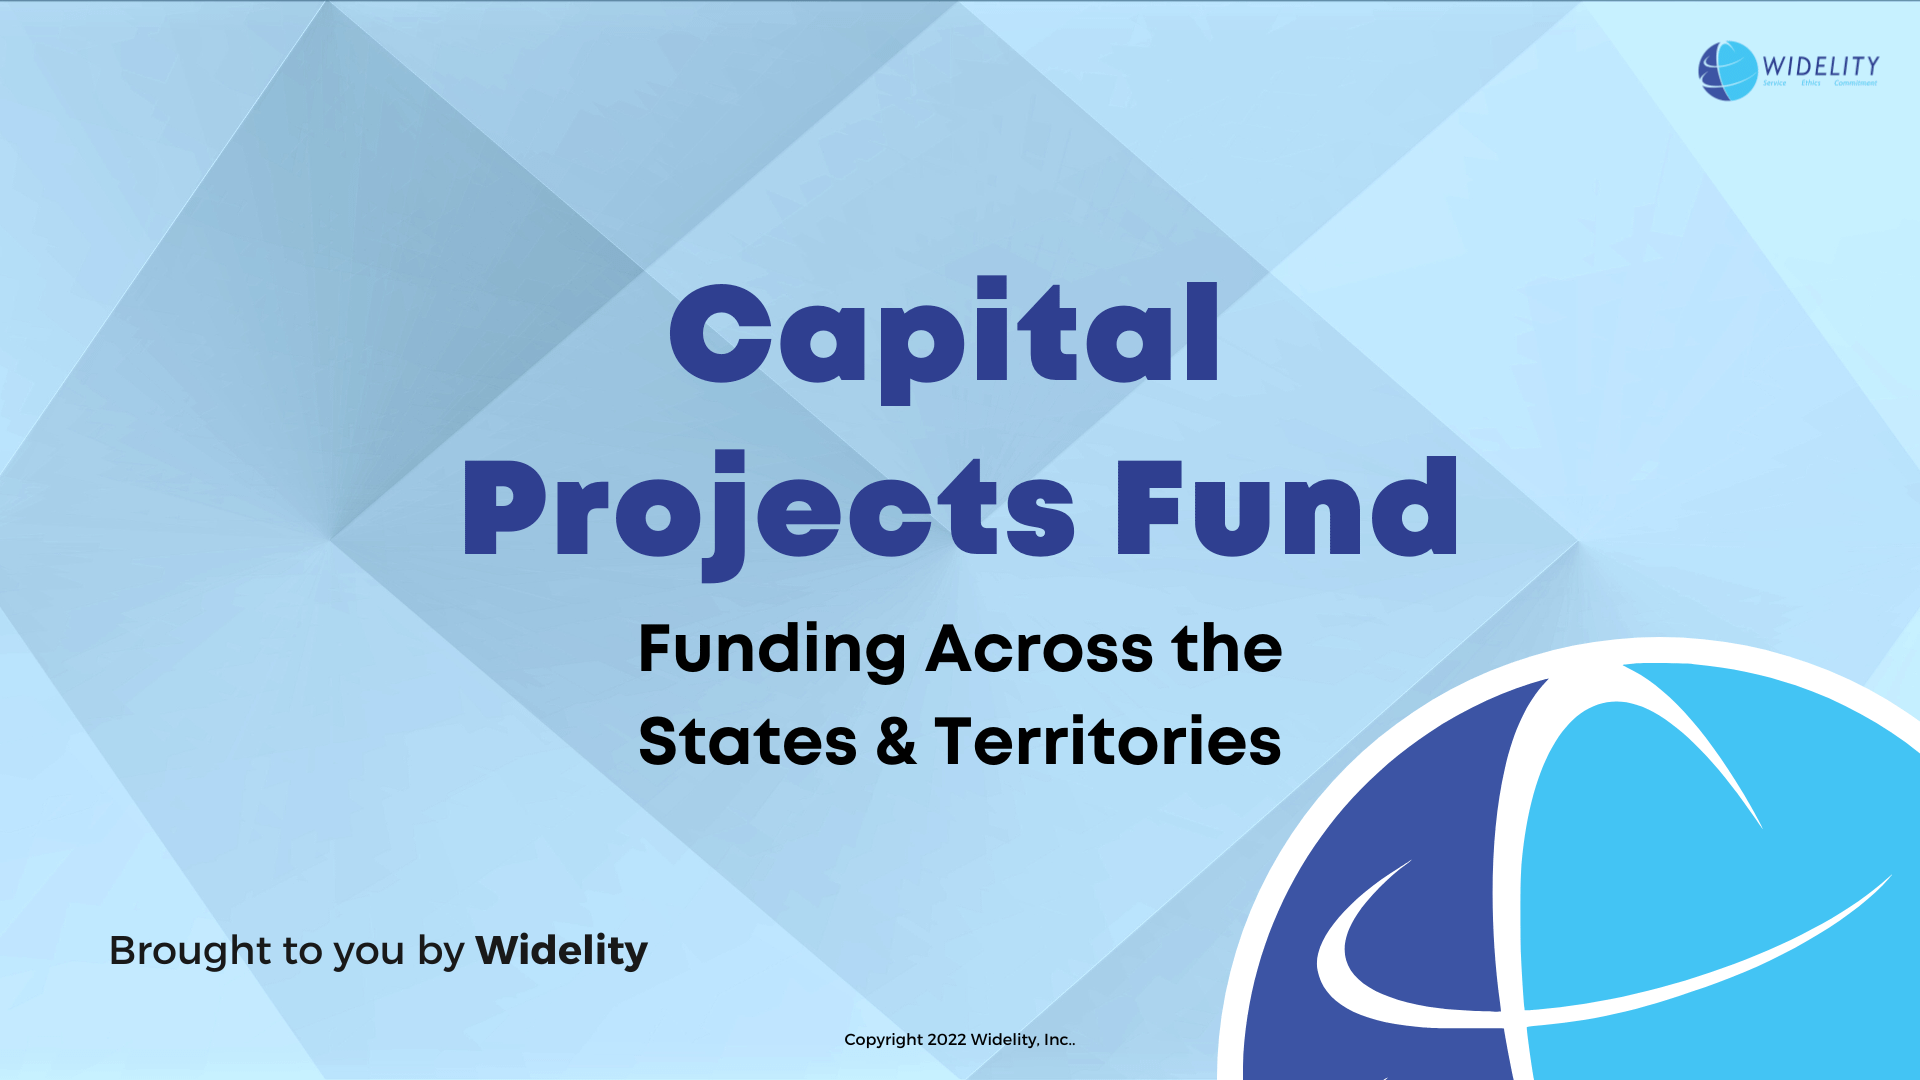 Title slide for the upcoming Widelity webinar on the Capital Projects Fund, funding across the states and territories